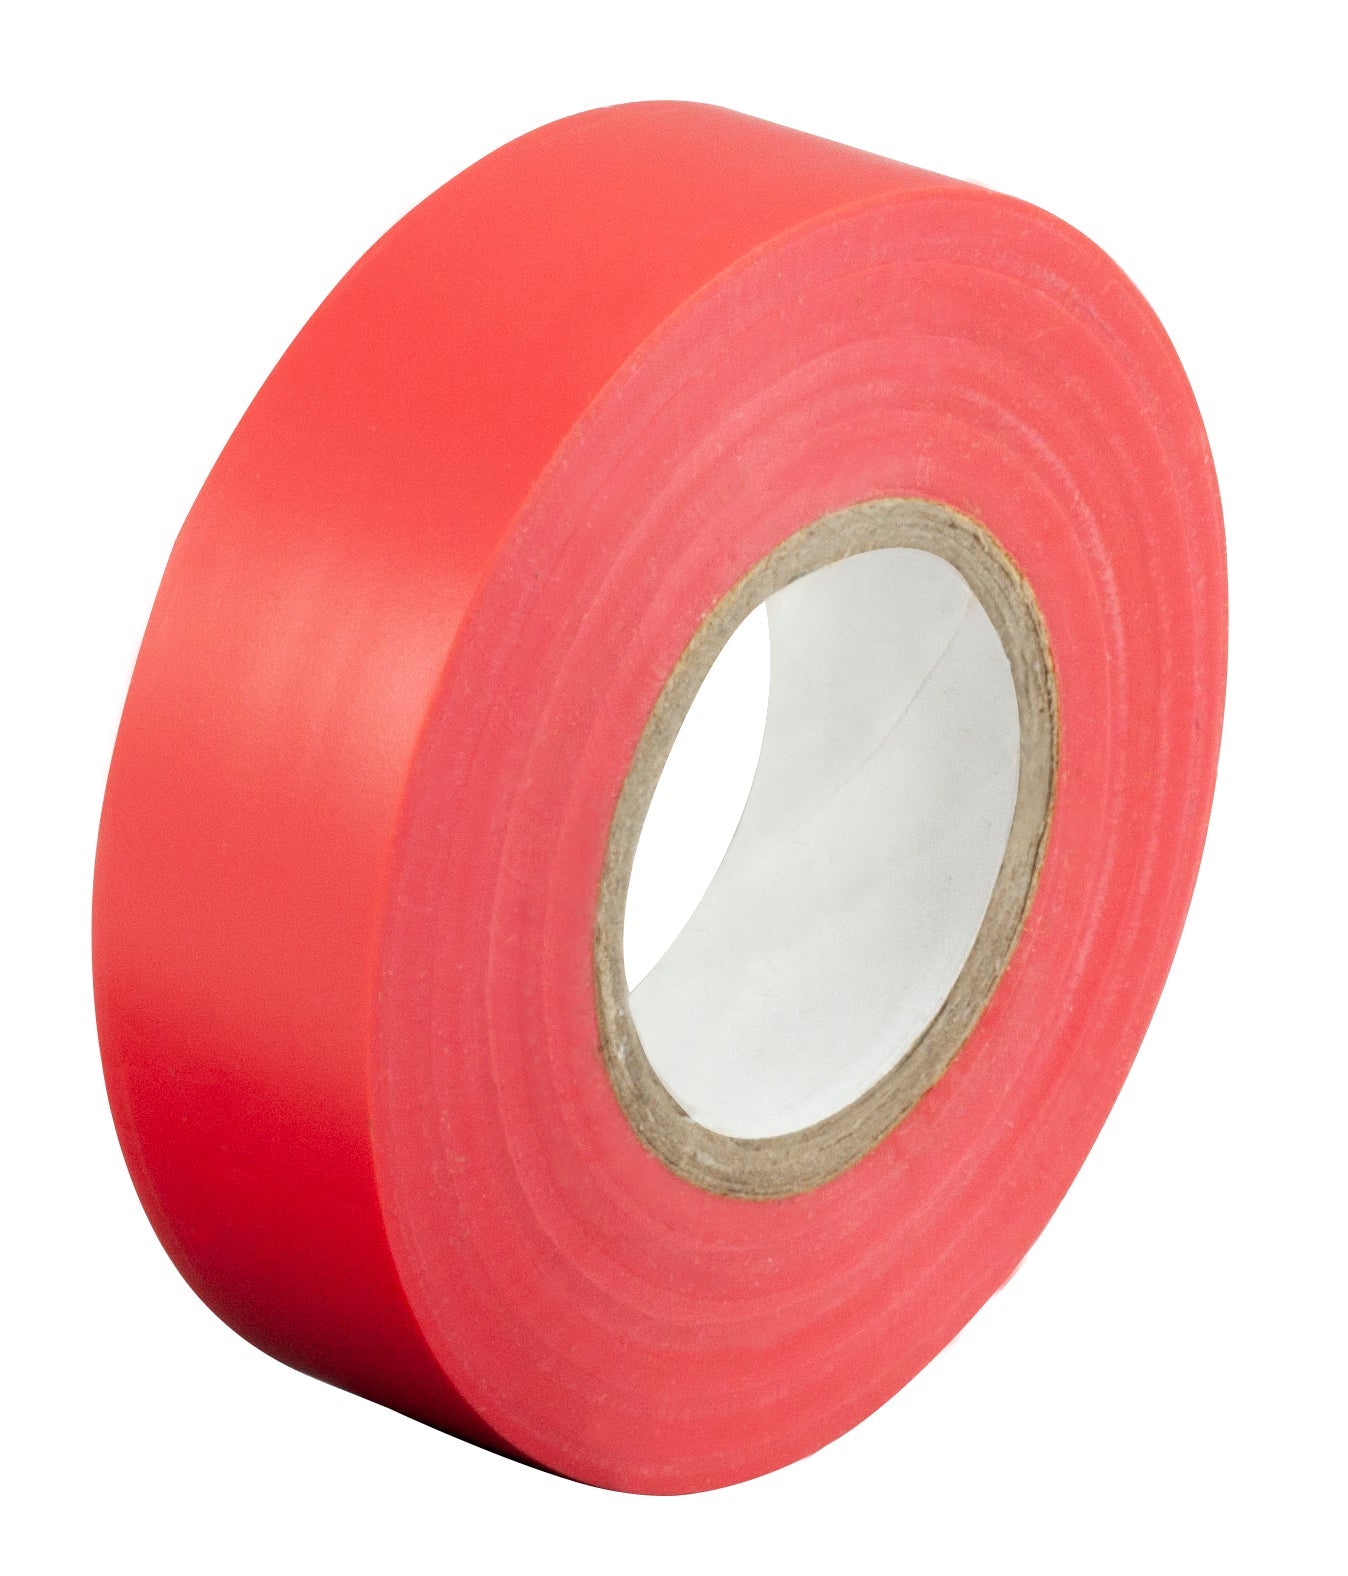 PVC Tape Size: 19mmx20m Roll - Red - Pack of 10